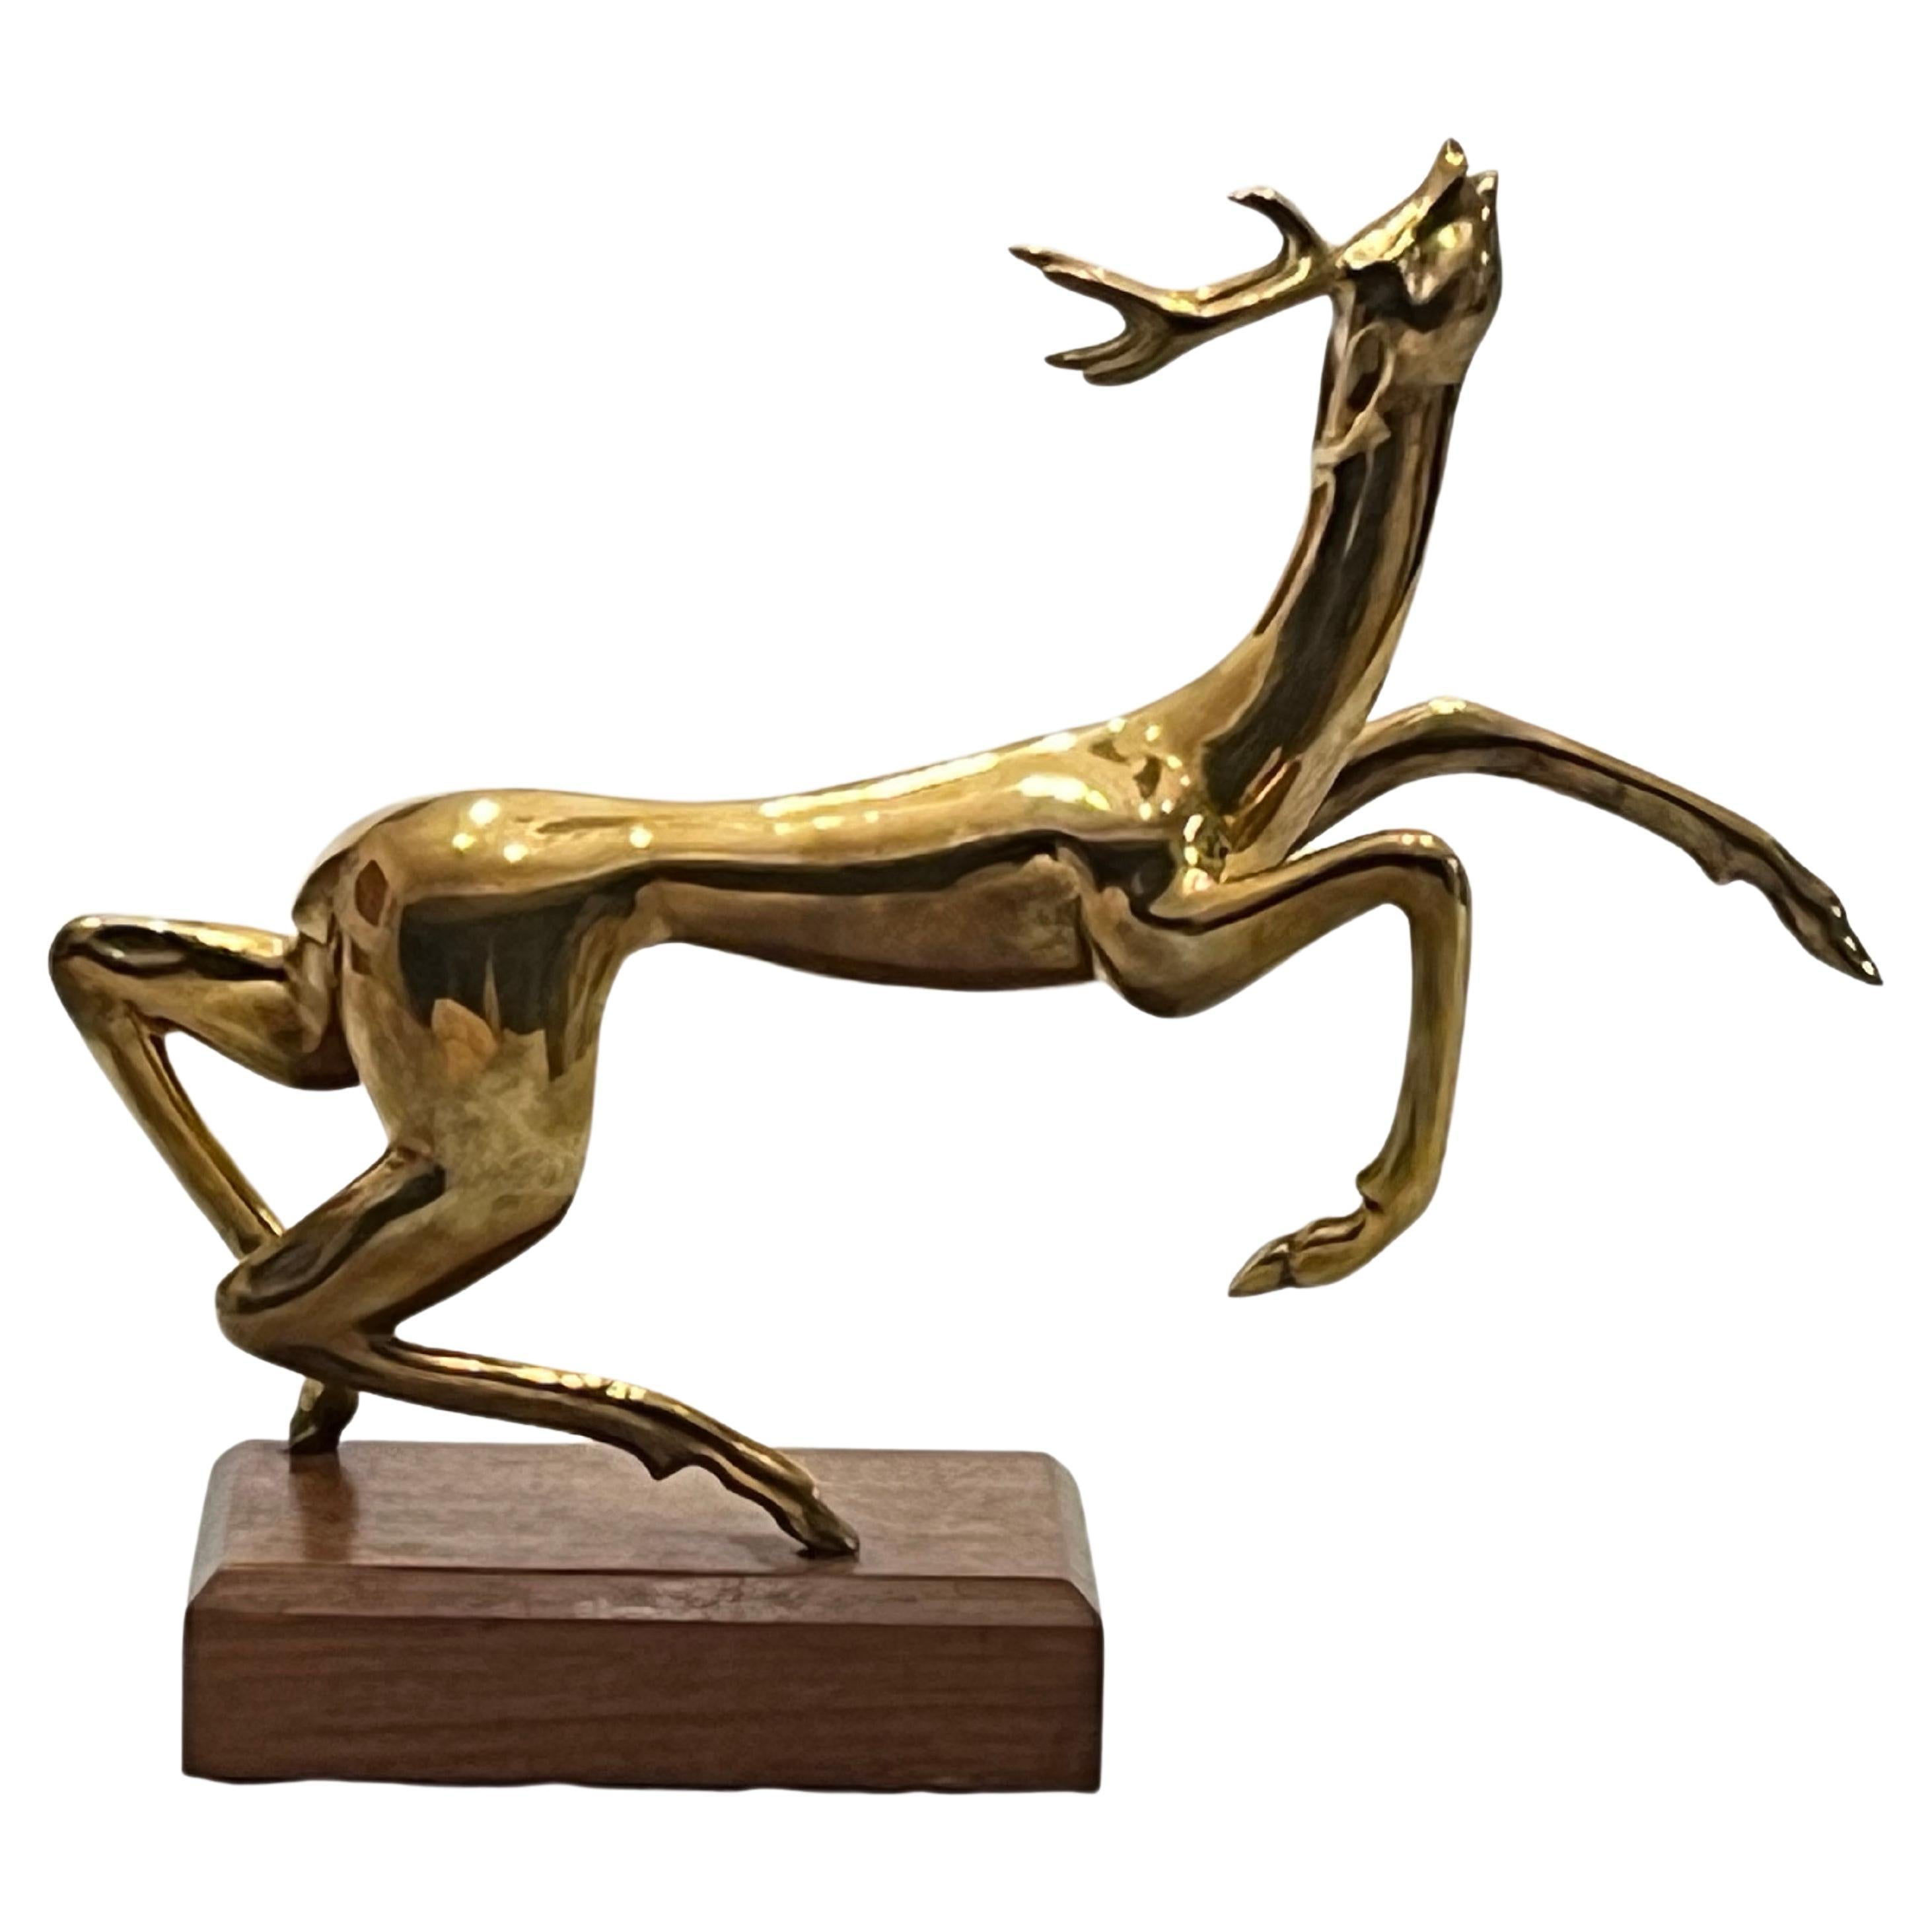 Vintage Thai Somchai Hattakitkosol Signed Solid Bronze Sculpture of Leaping Deer For Sale